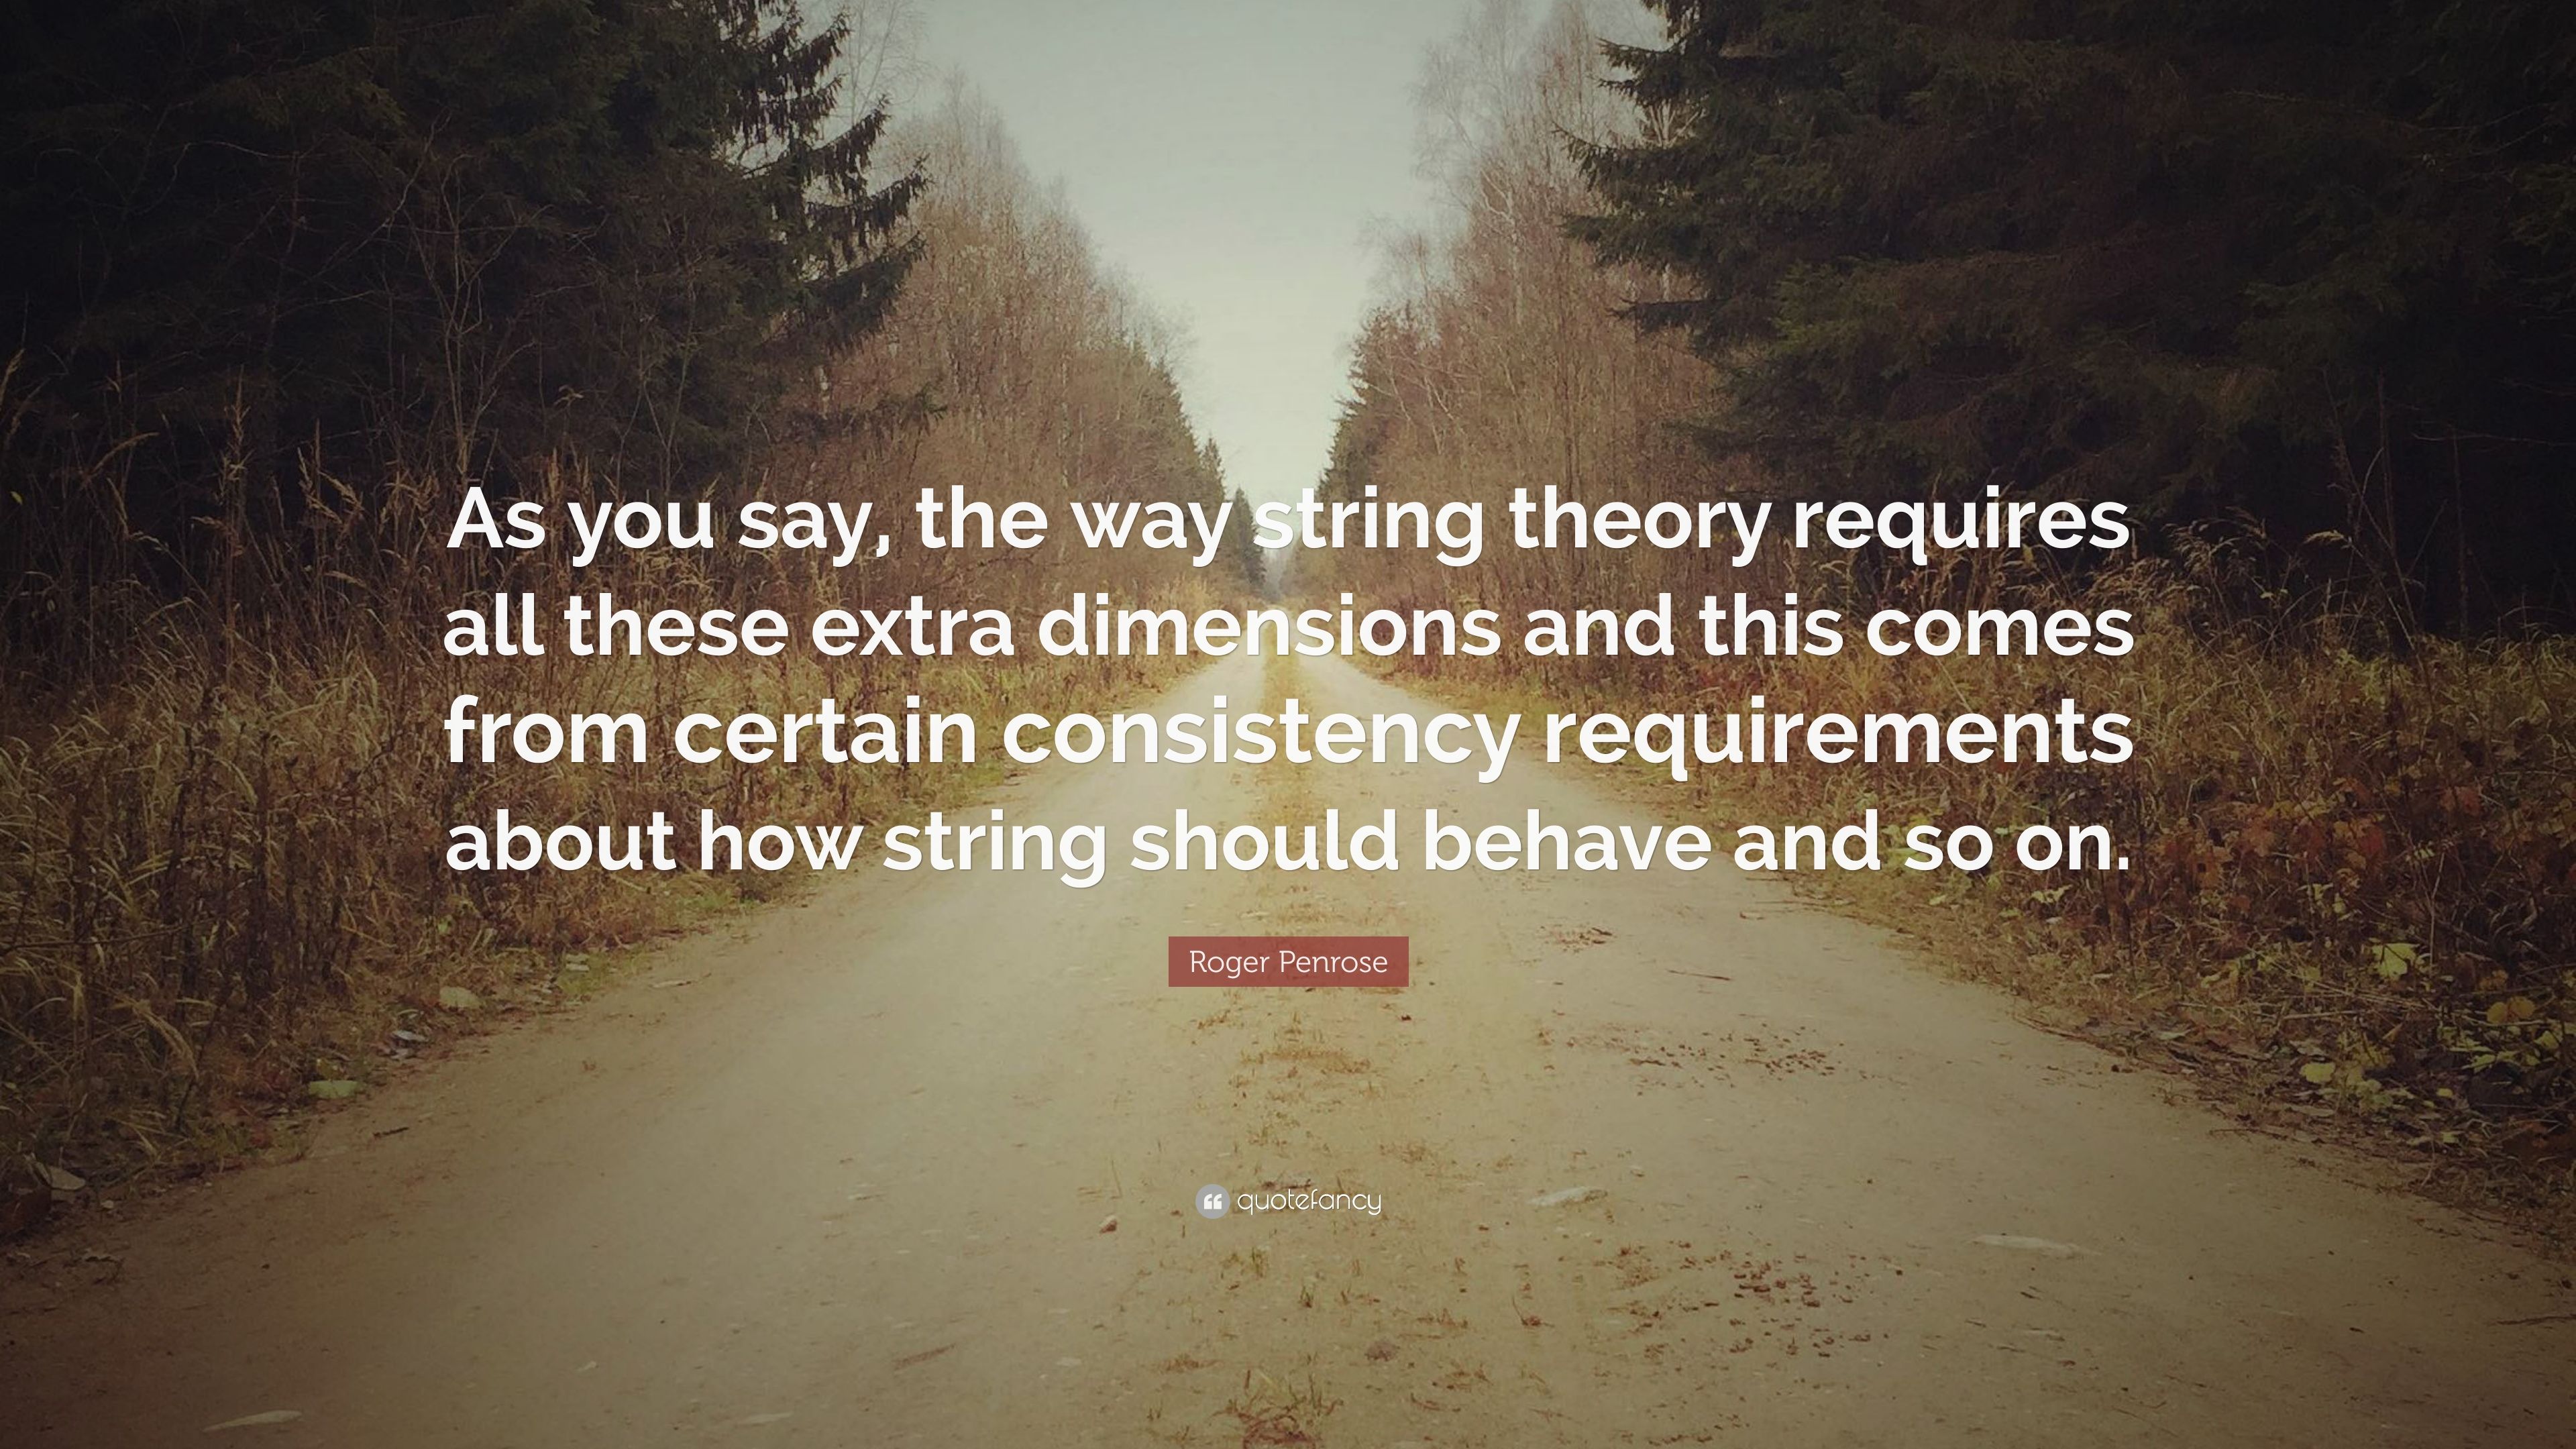 Roger Penrose Quote: “As you say, the way string theory requires all these extra dimensions and this comes from certain consistency requiremen.” (7 wallpaper)